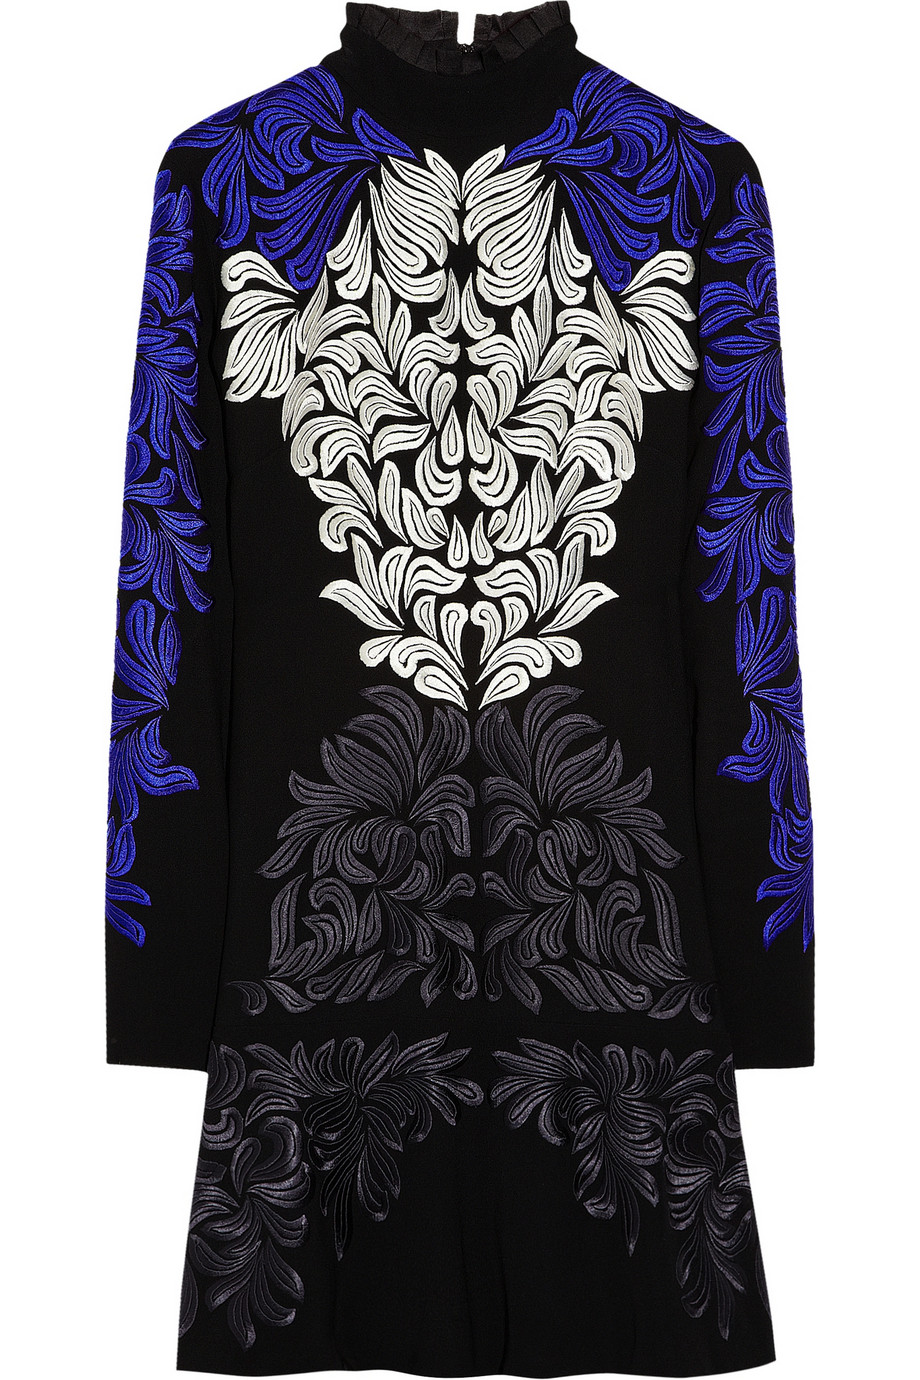 Lyst - Stella Mccartney Erica Embroidered Crepe Dress in Blue